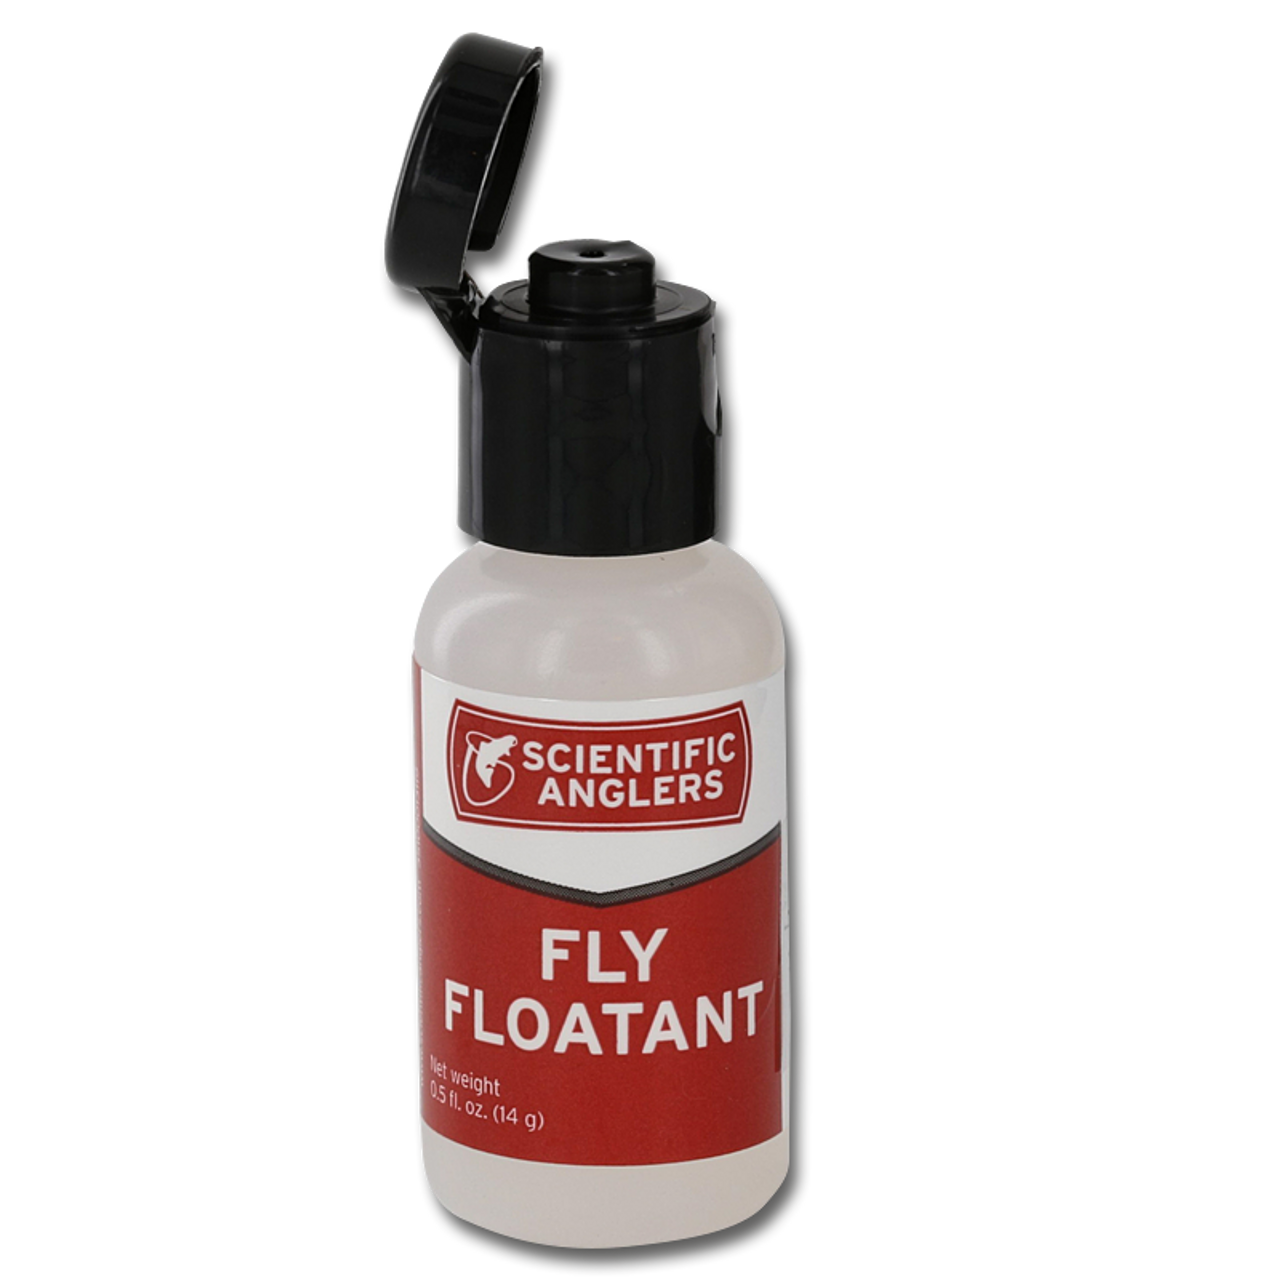 Scientific Anglers Gel Fly Floatant